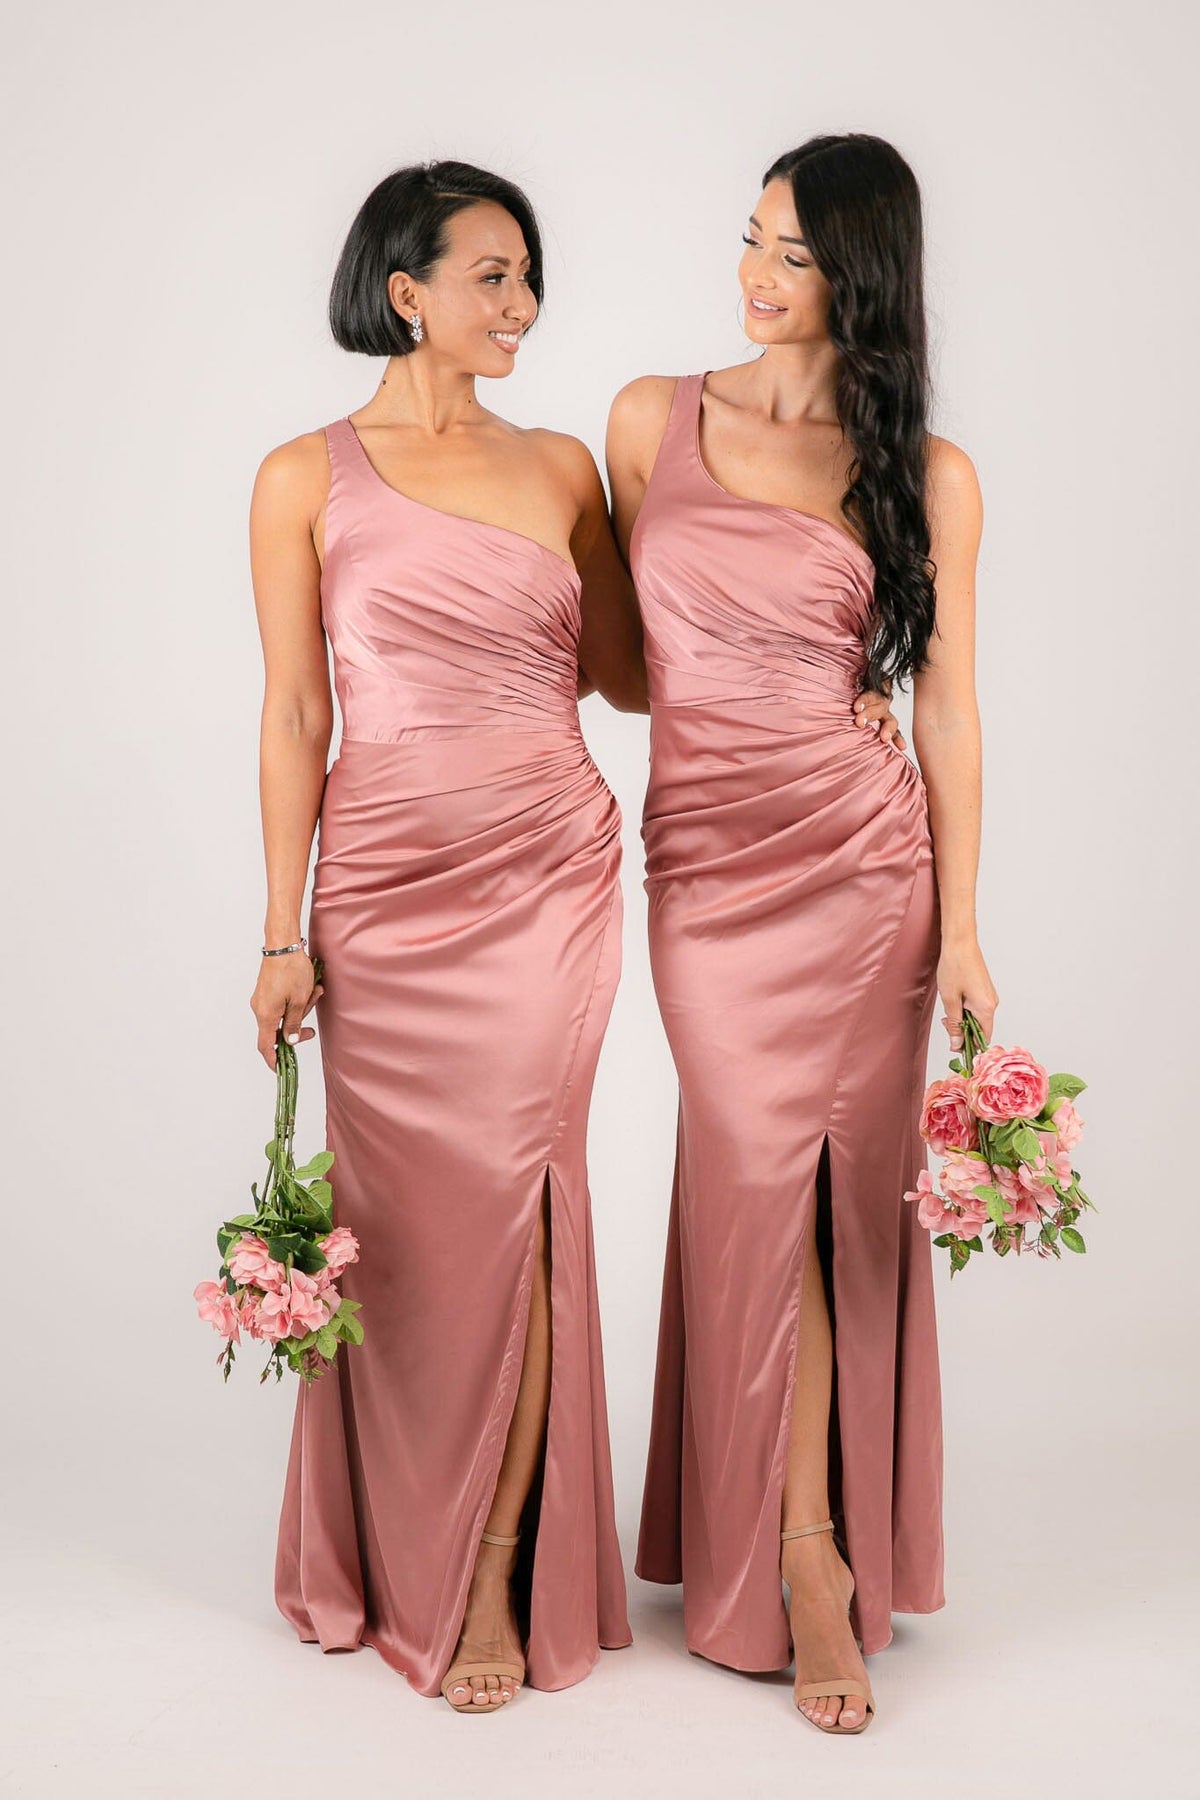 Dusty Pink One Shoulder Satin Bridesmaid Dress with Ruched Waist and Leg Slit